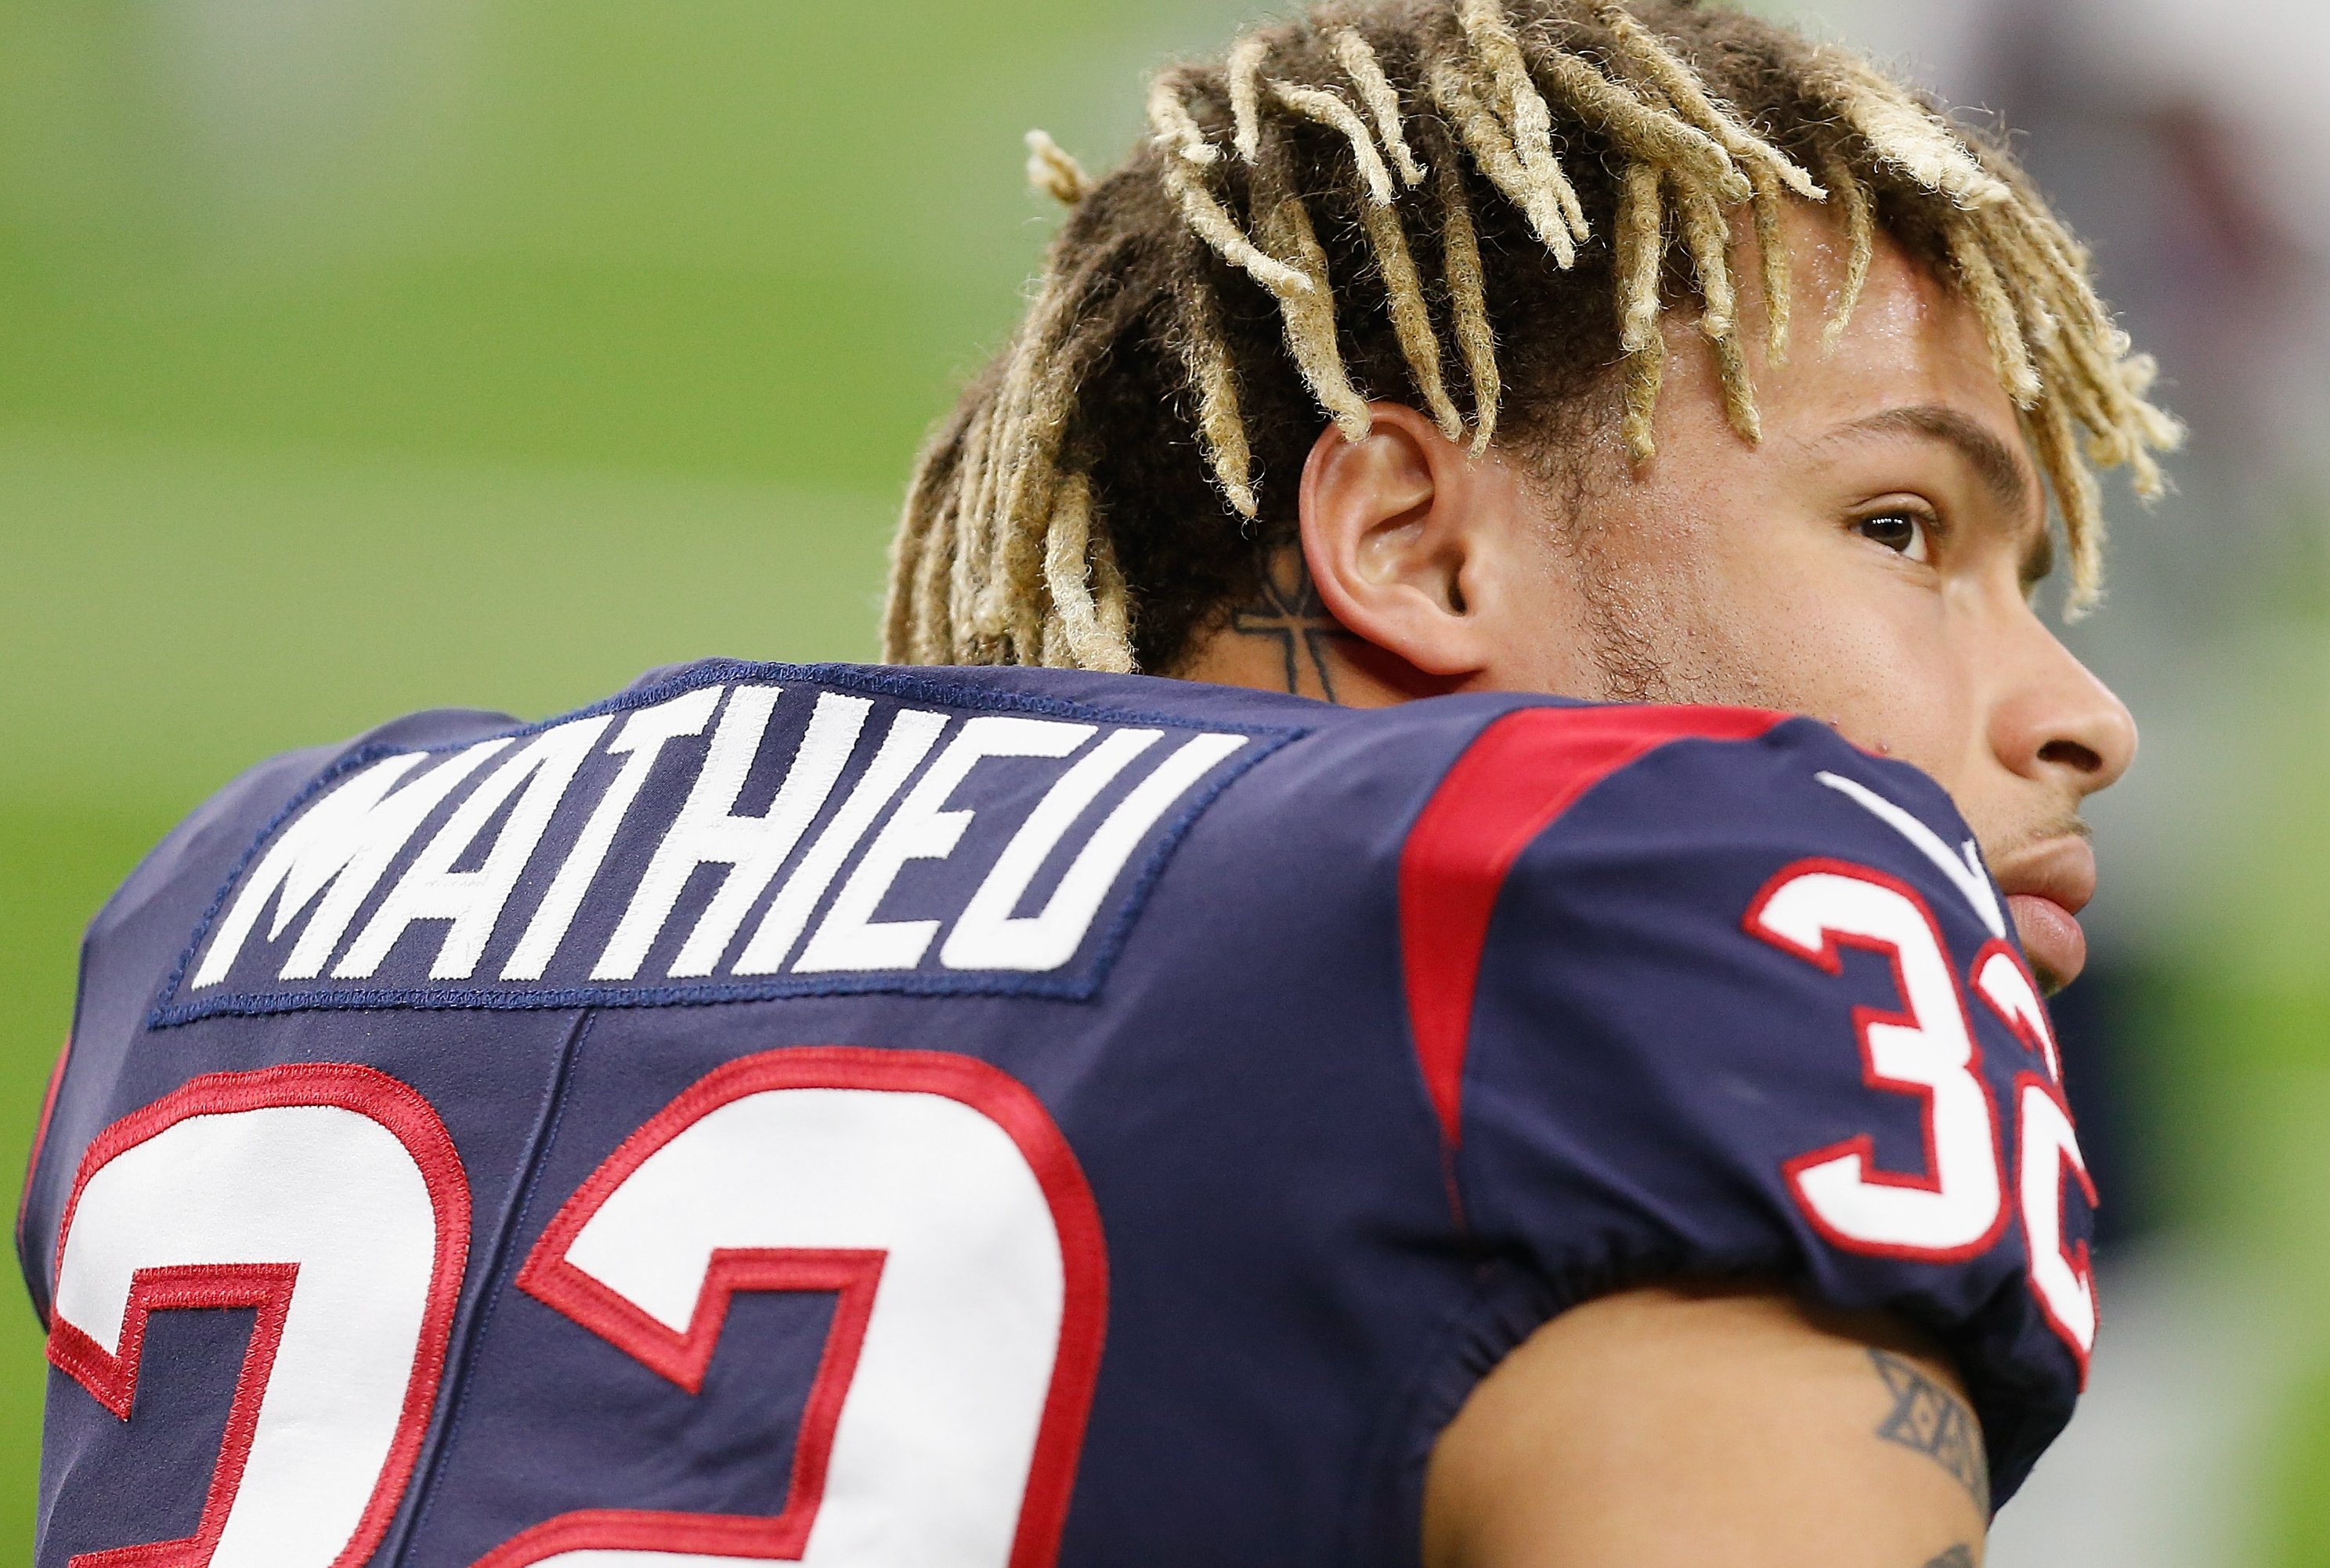 The training camp speech that made Tyrann Mathieu one of the